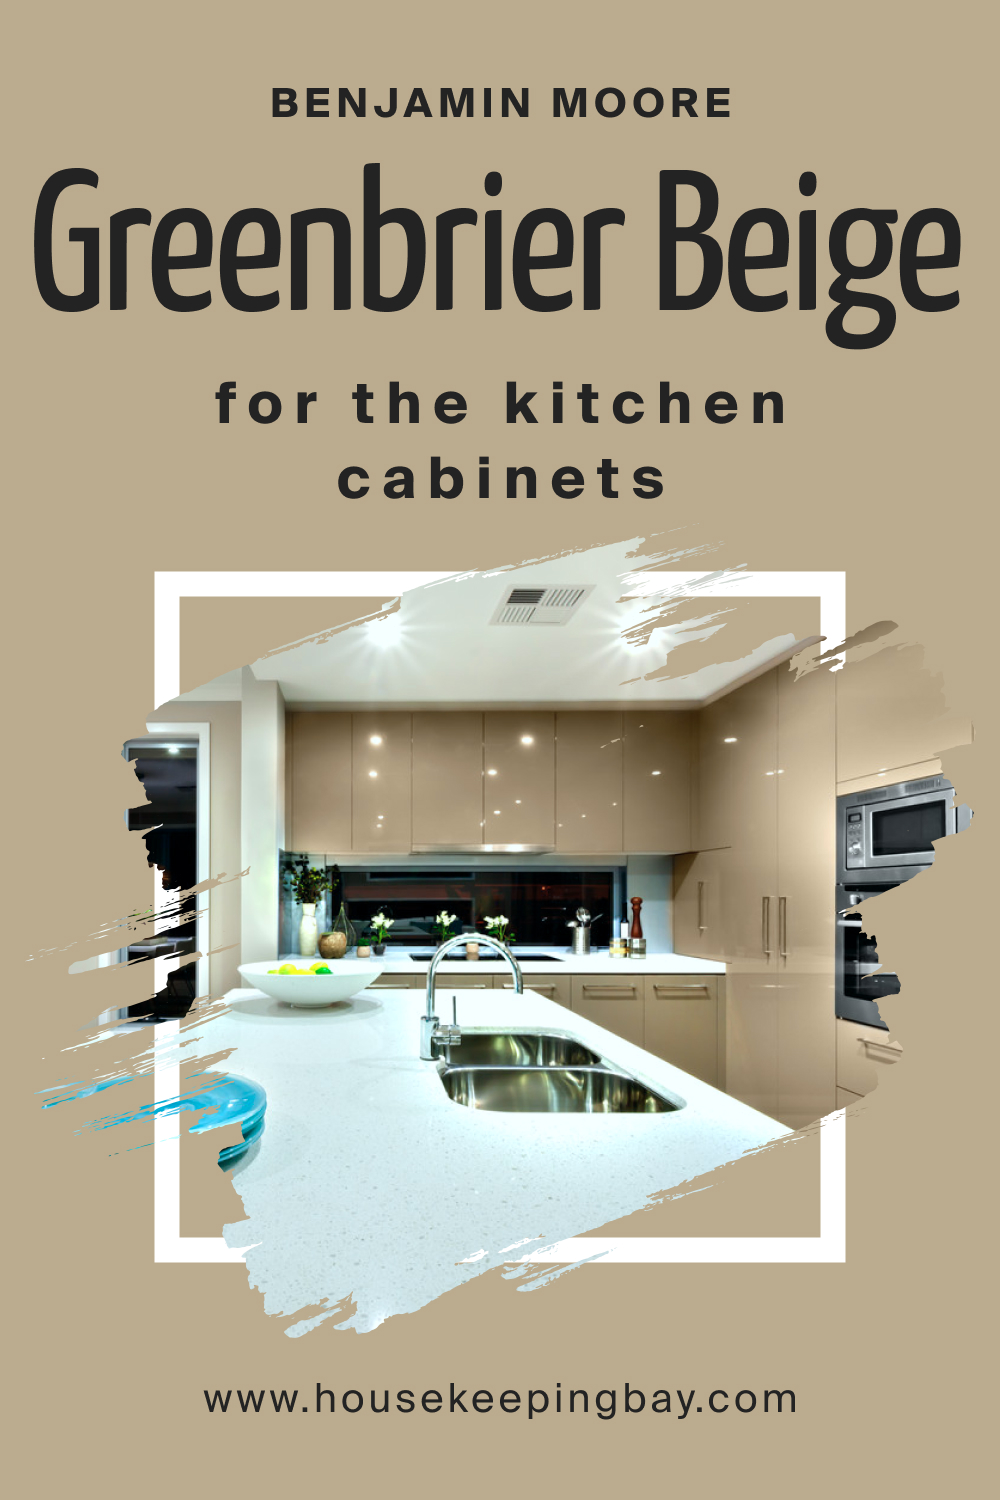 How to Use BM Greenbrier Beige HC-79 on the Kitchen Cabinets?